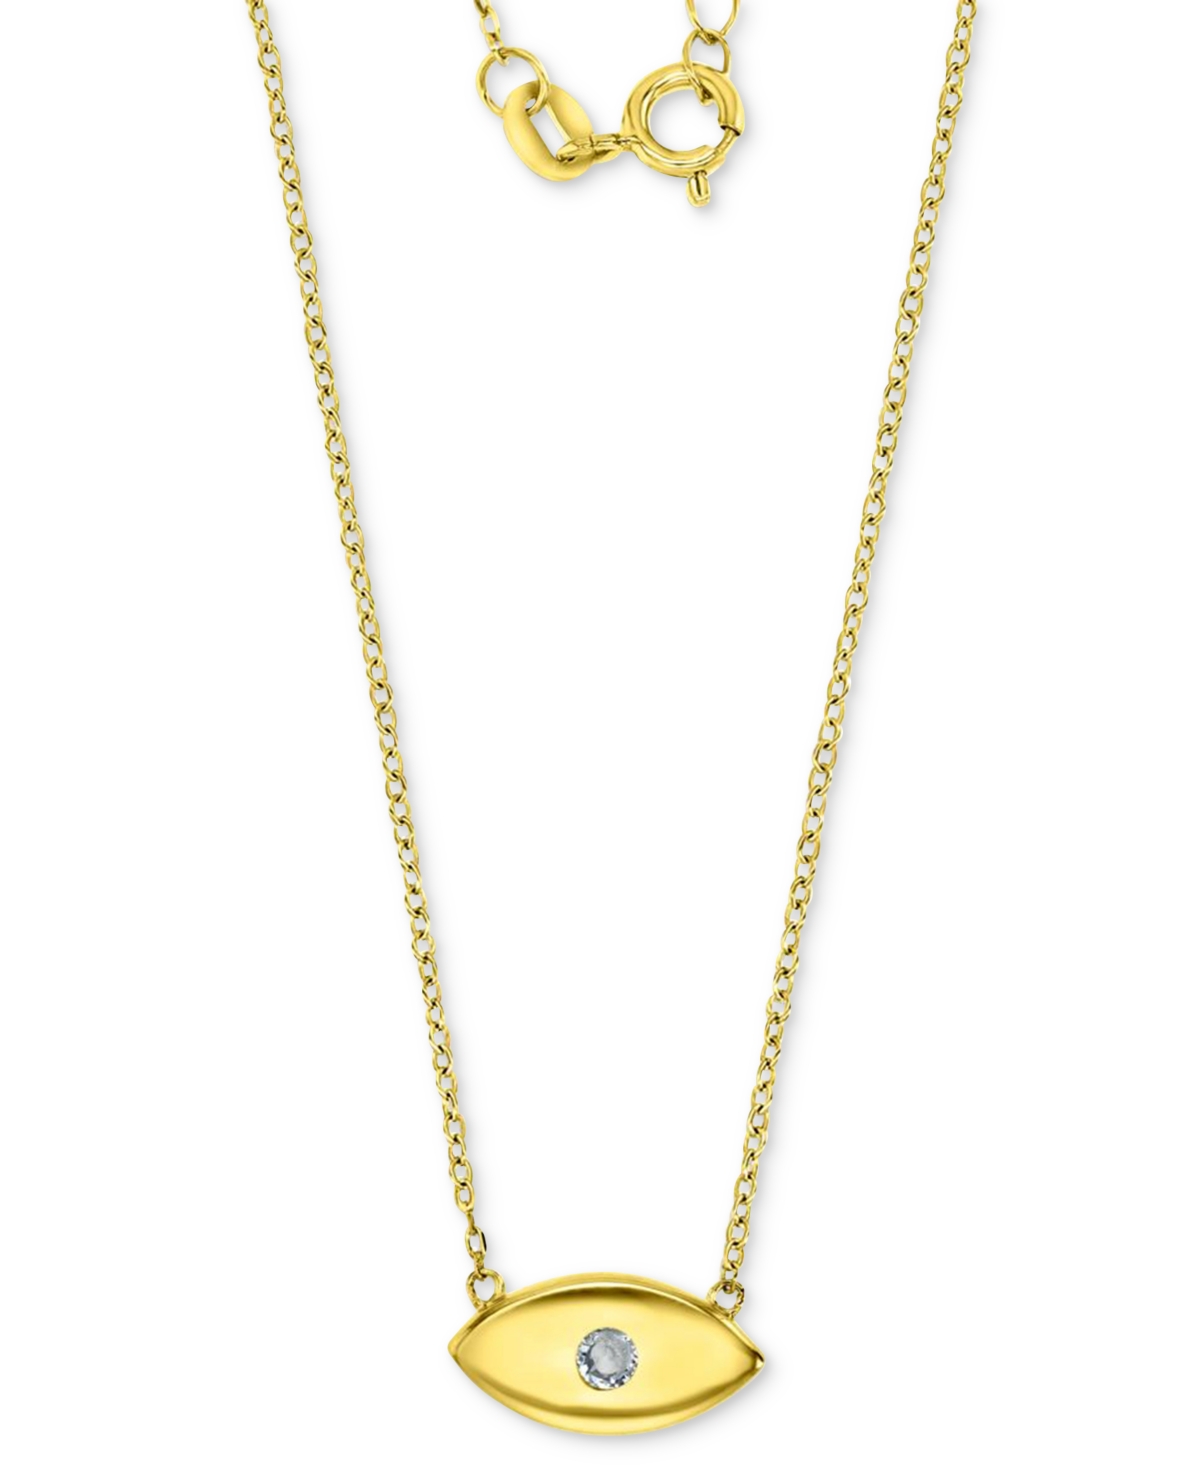 Cubic Zirconia Polished Evil Eye Pendant Necklace in 14k Gold-Plated Sterling Silver, 16" + 2" extender - Gold